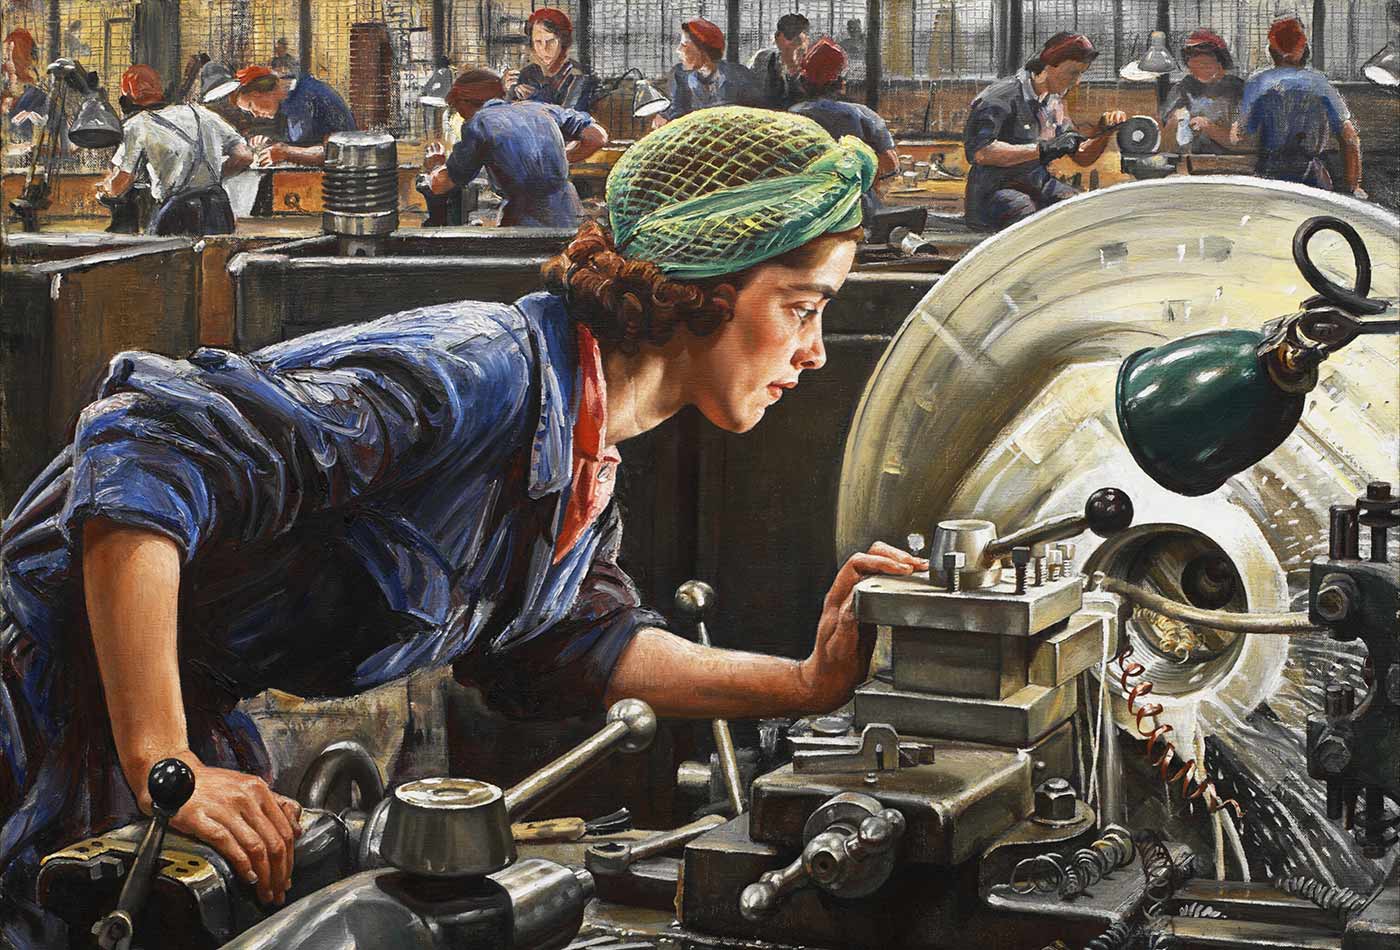 A young factory worker at work on an industrial lathe.